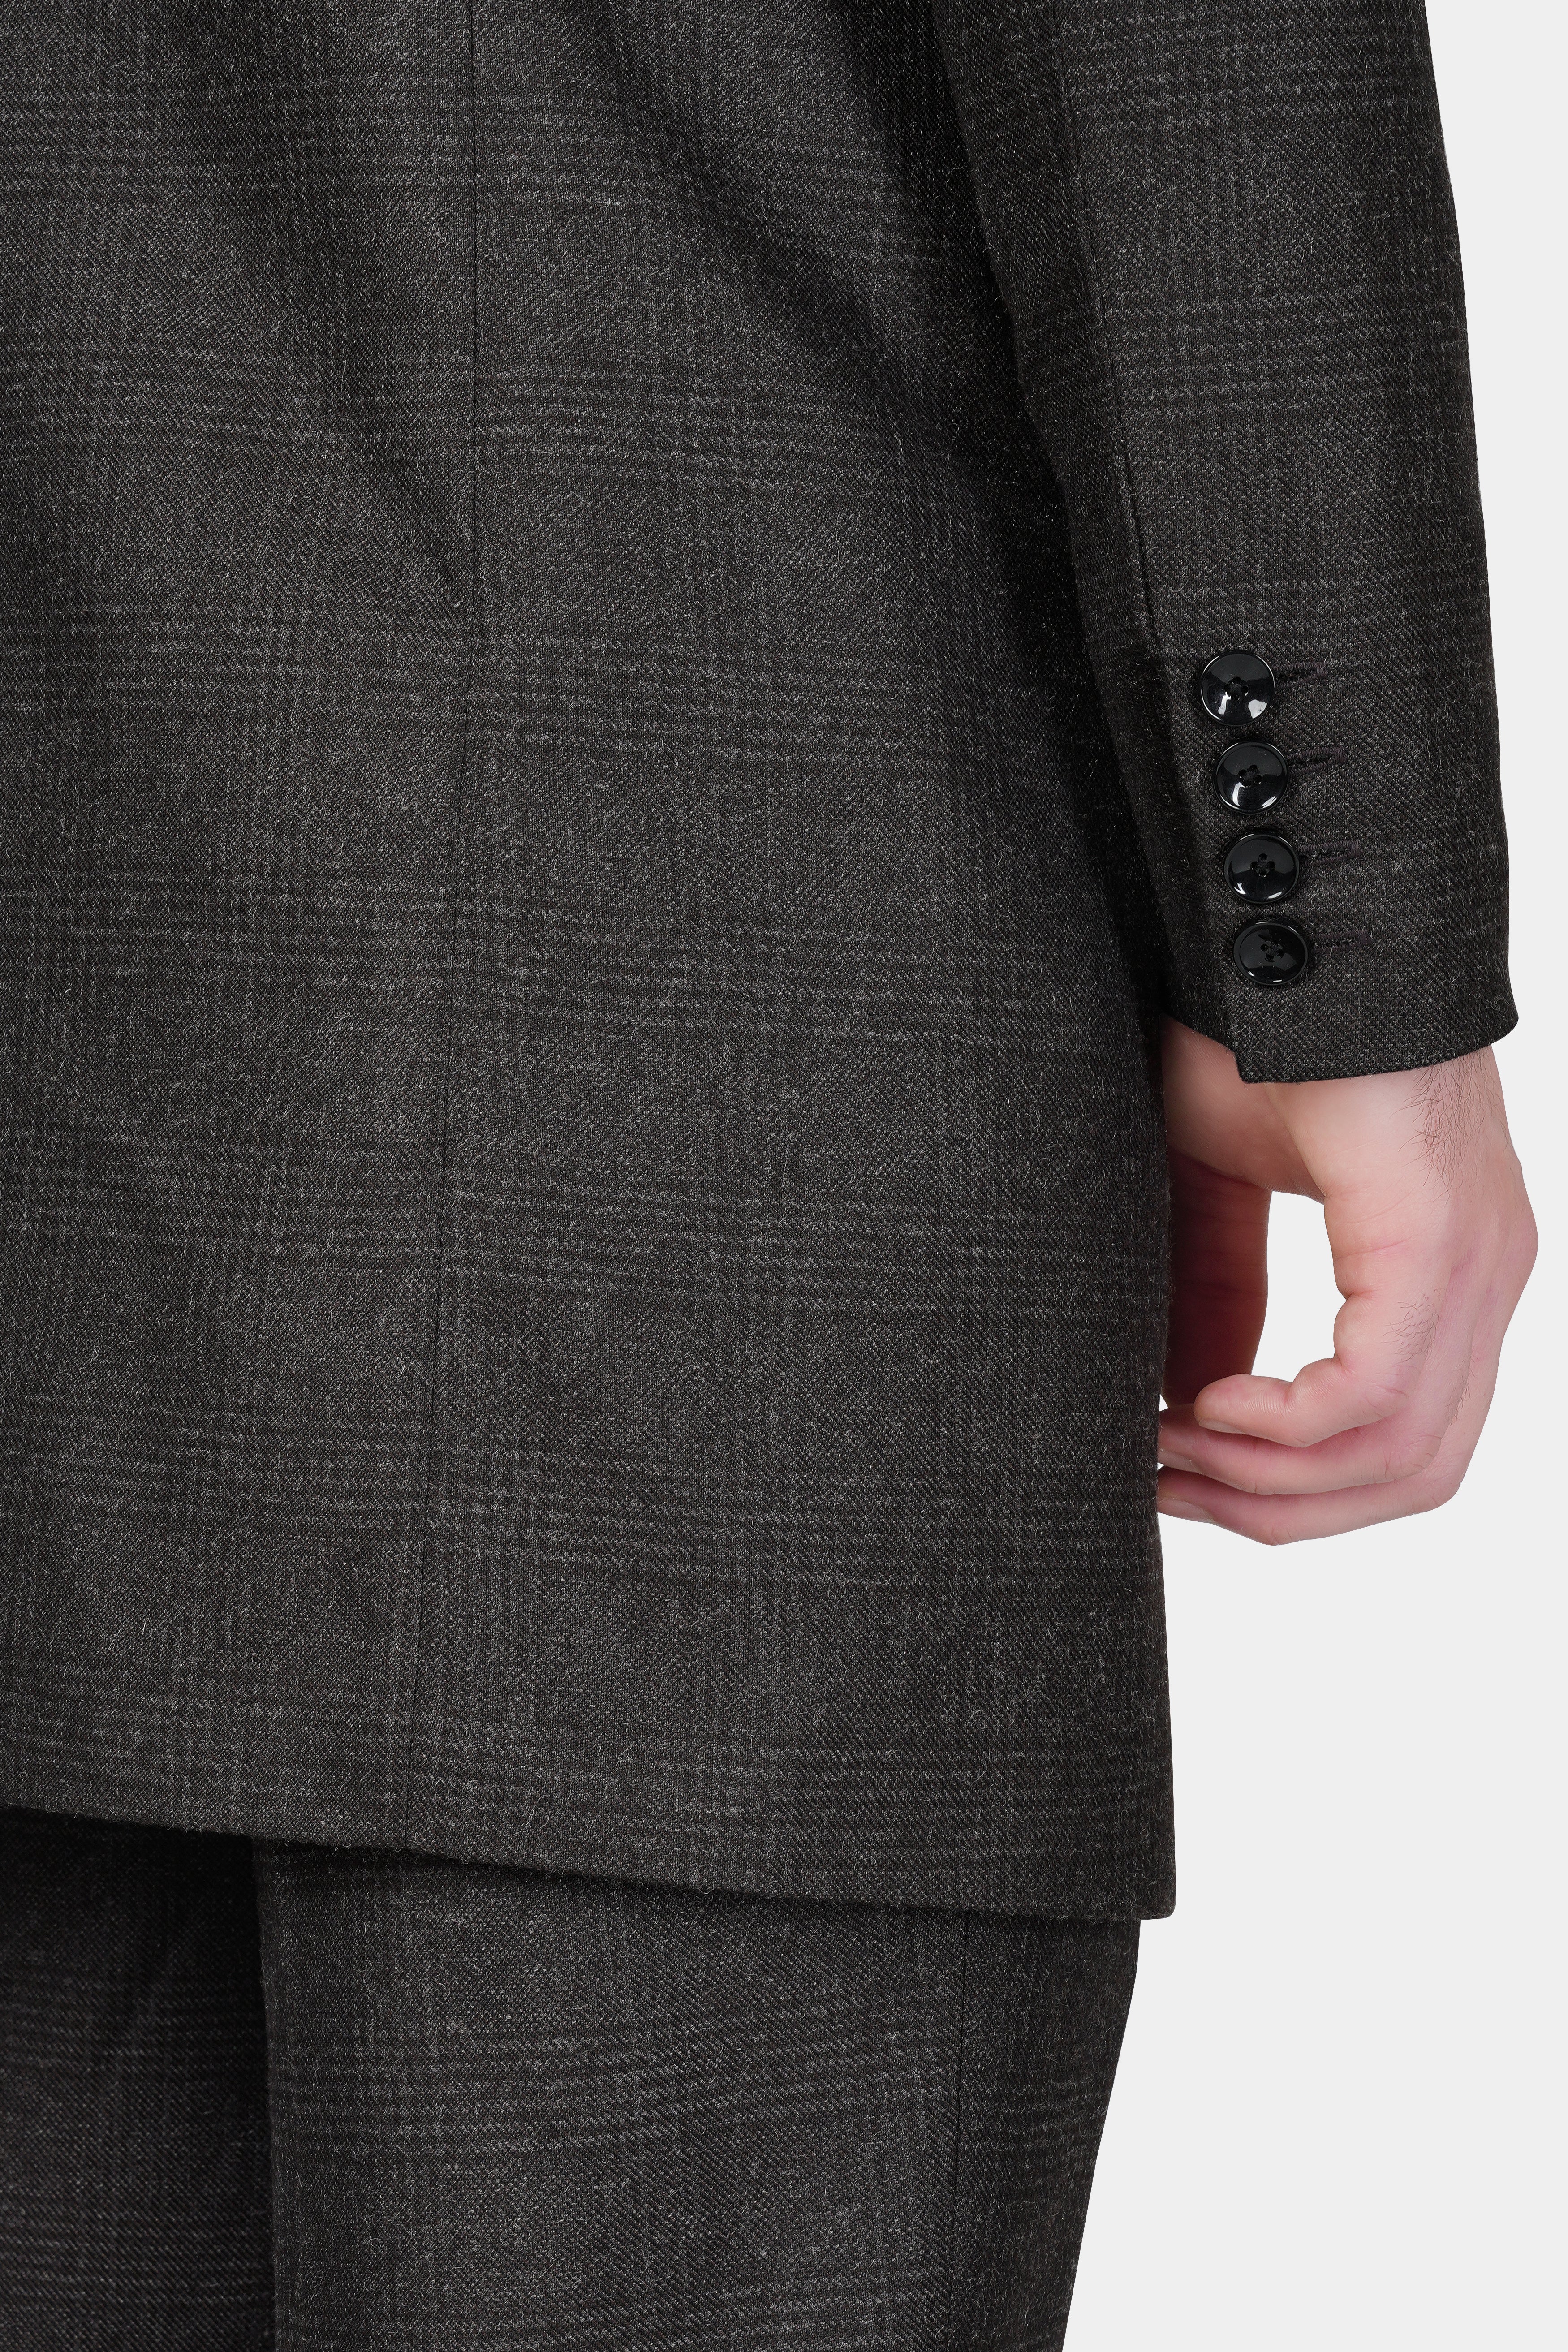 Mirage Gray Subtle Plaid Wool rich Trench Coat